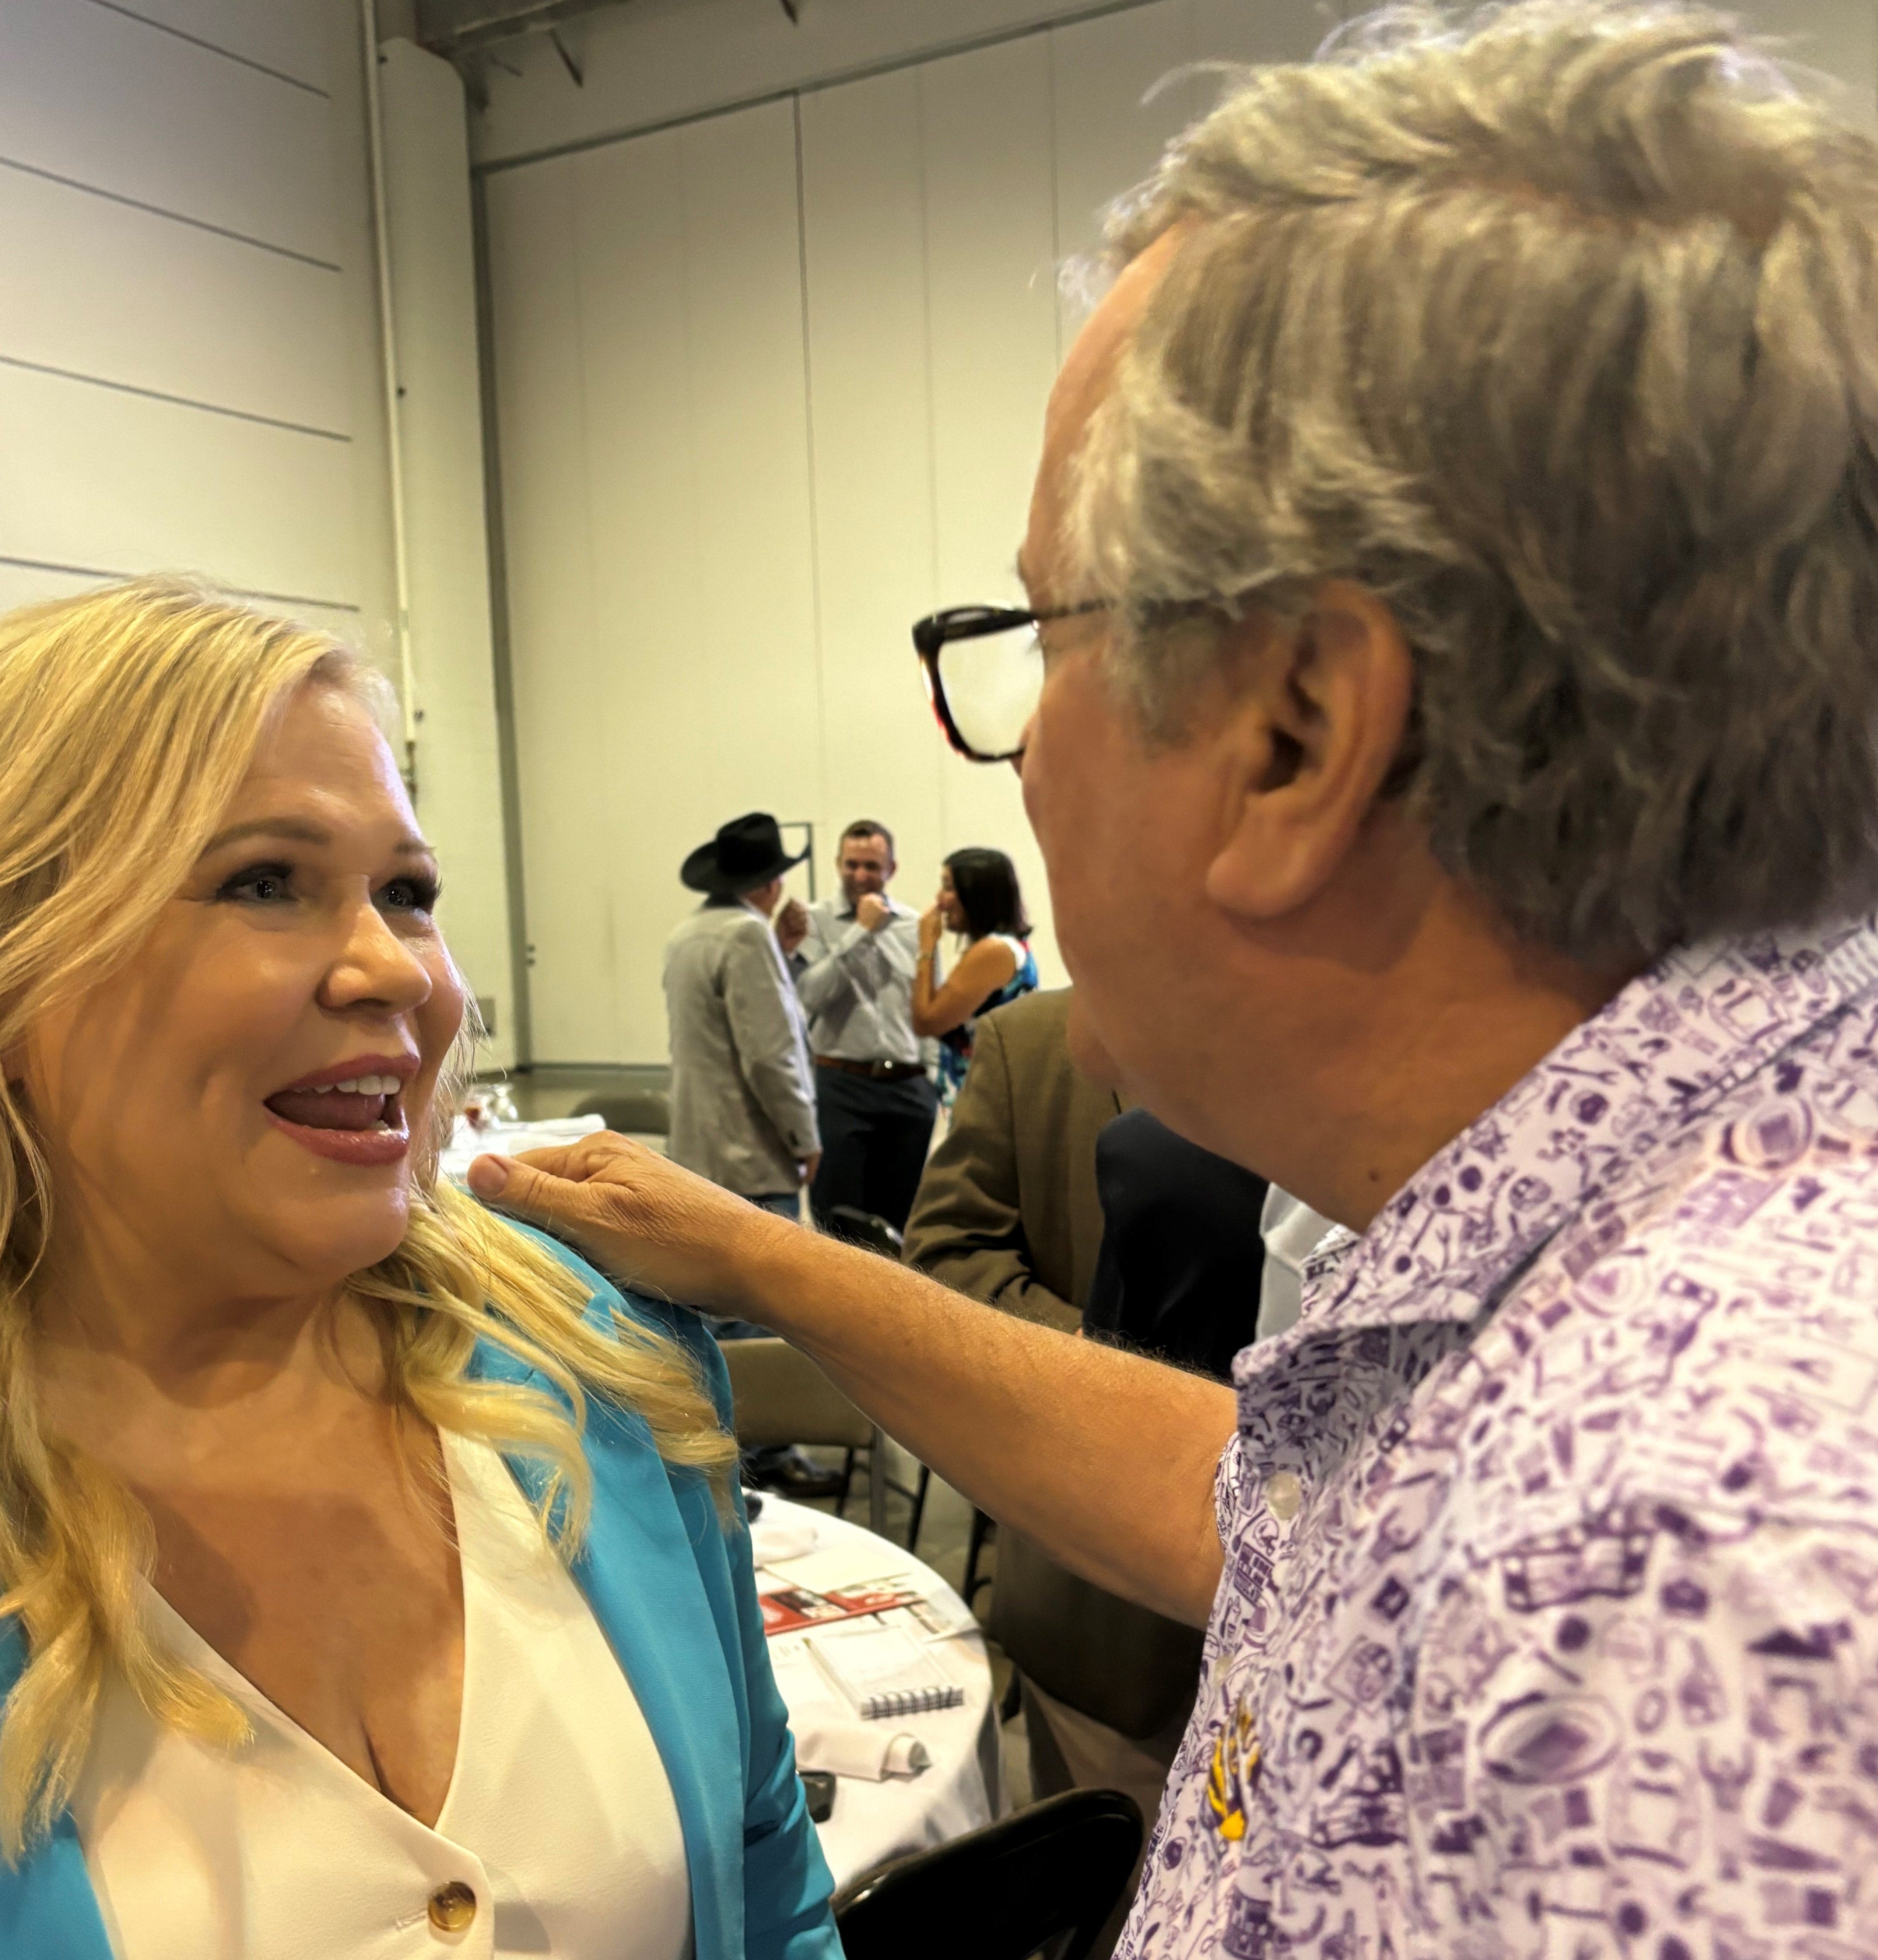 ESPN’s Holly Rowe tells Independence Bowl attendees she 'will die for you to get the story’